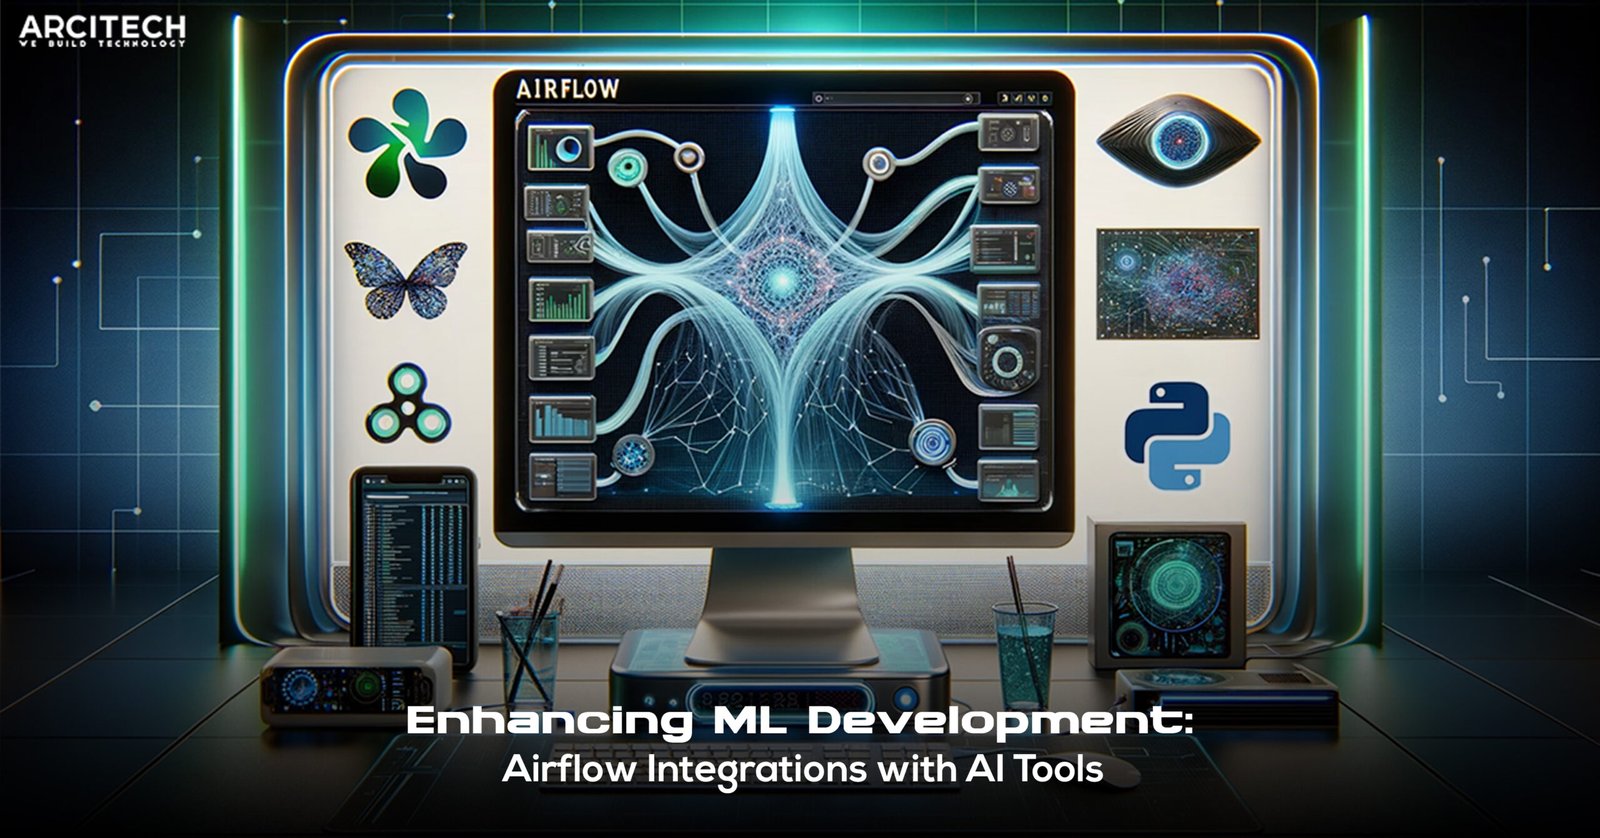 Enhancing ML Development: Airflow Integrations with AI Tools